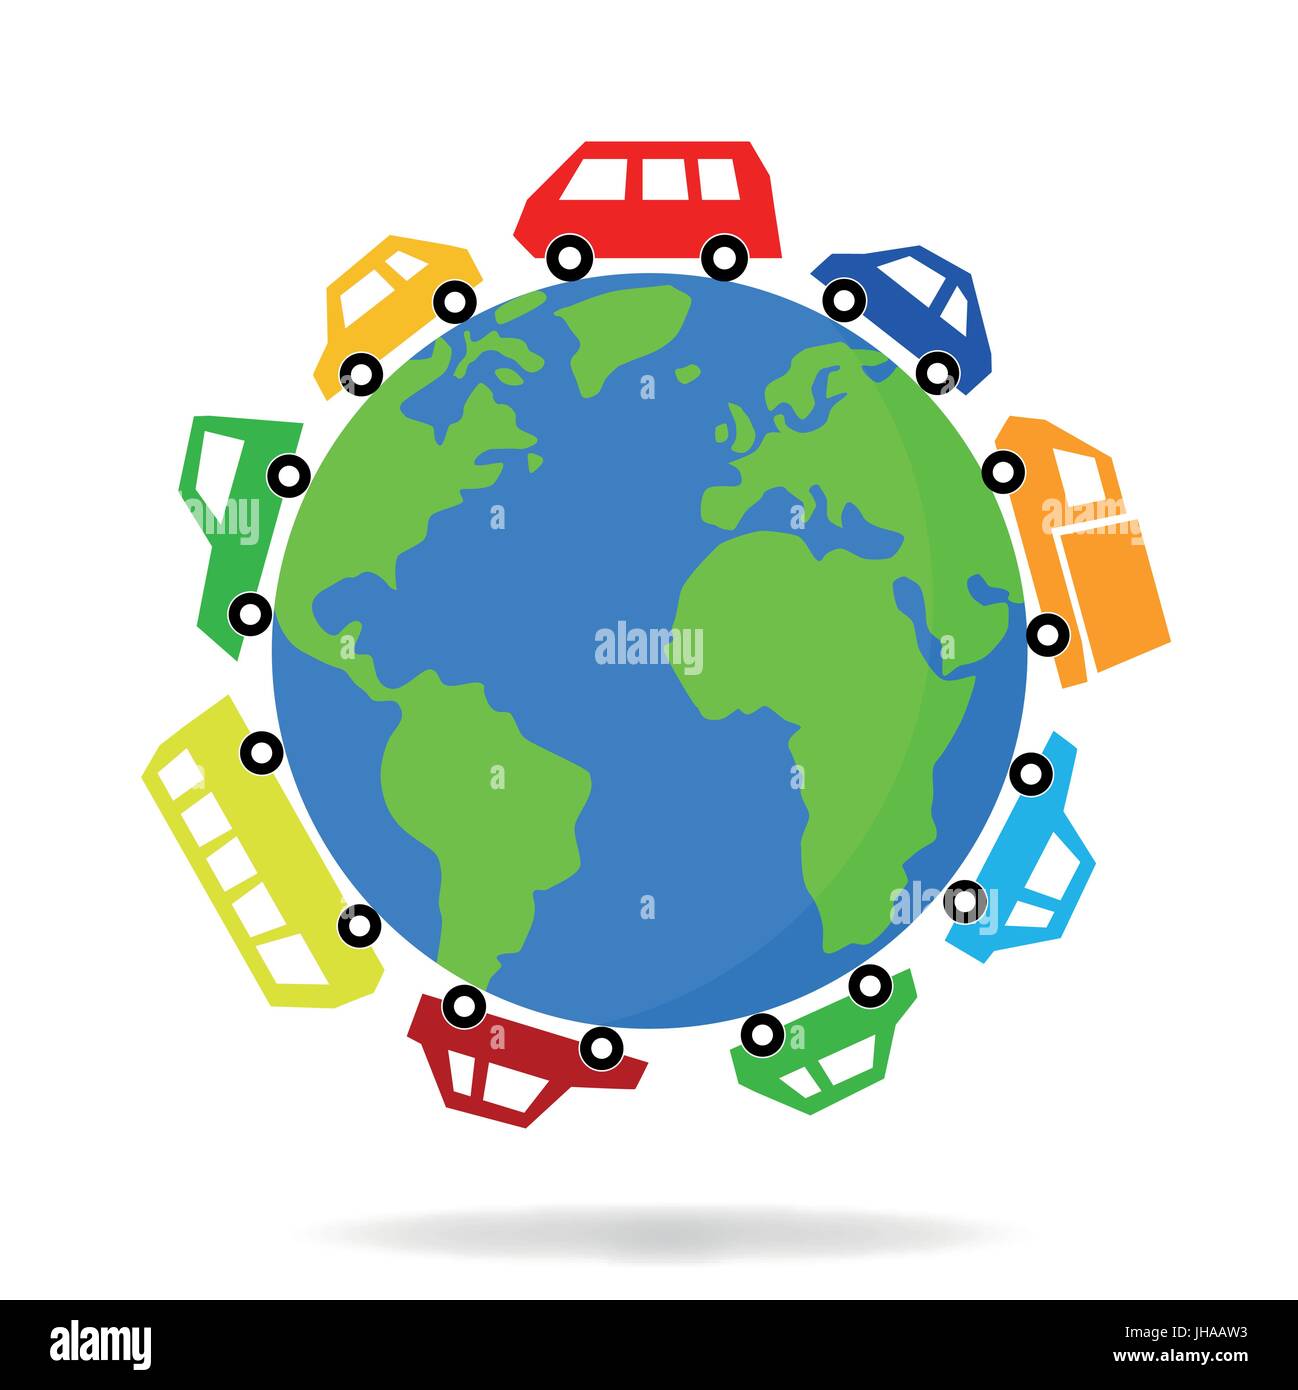 illustration of cars driving around the world vector graphic Stock Photo